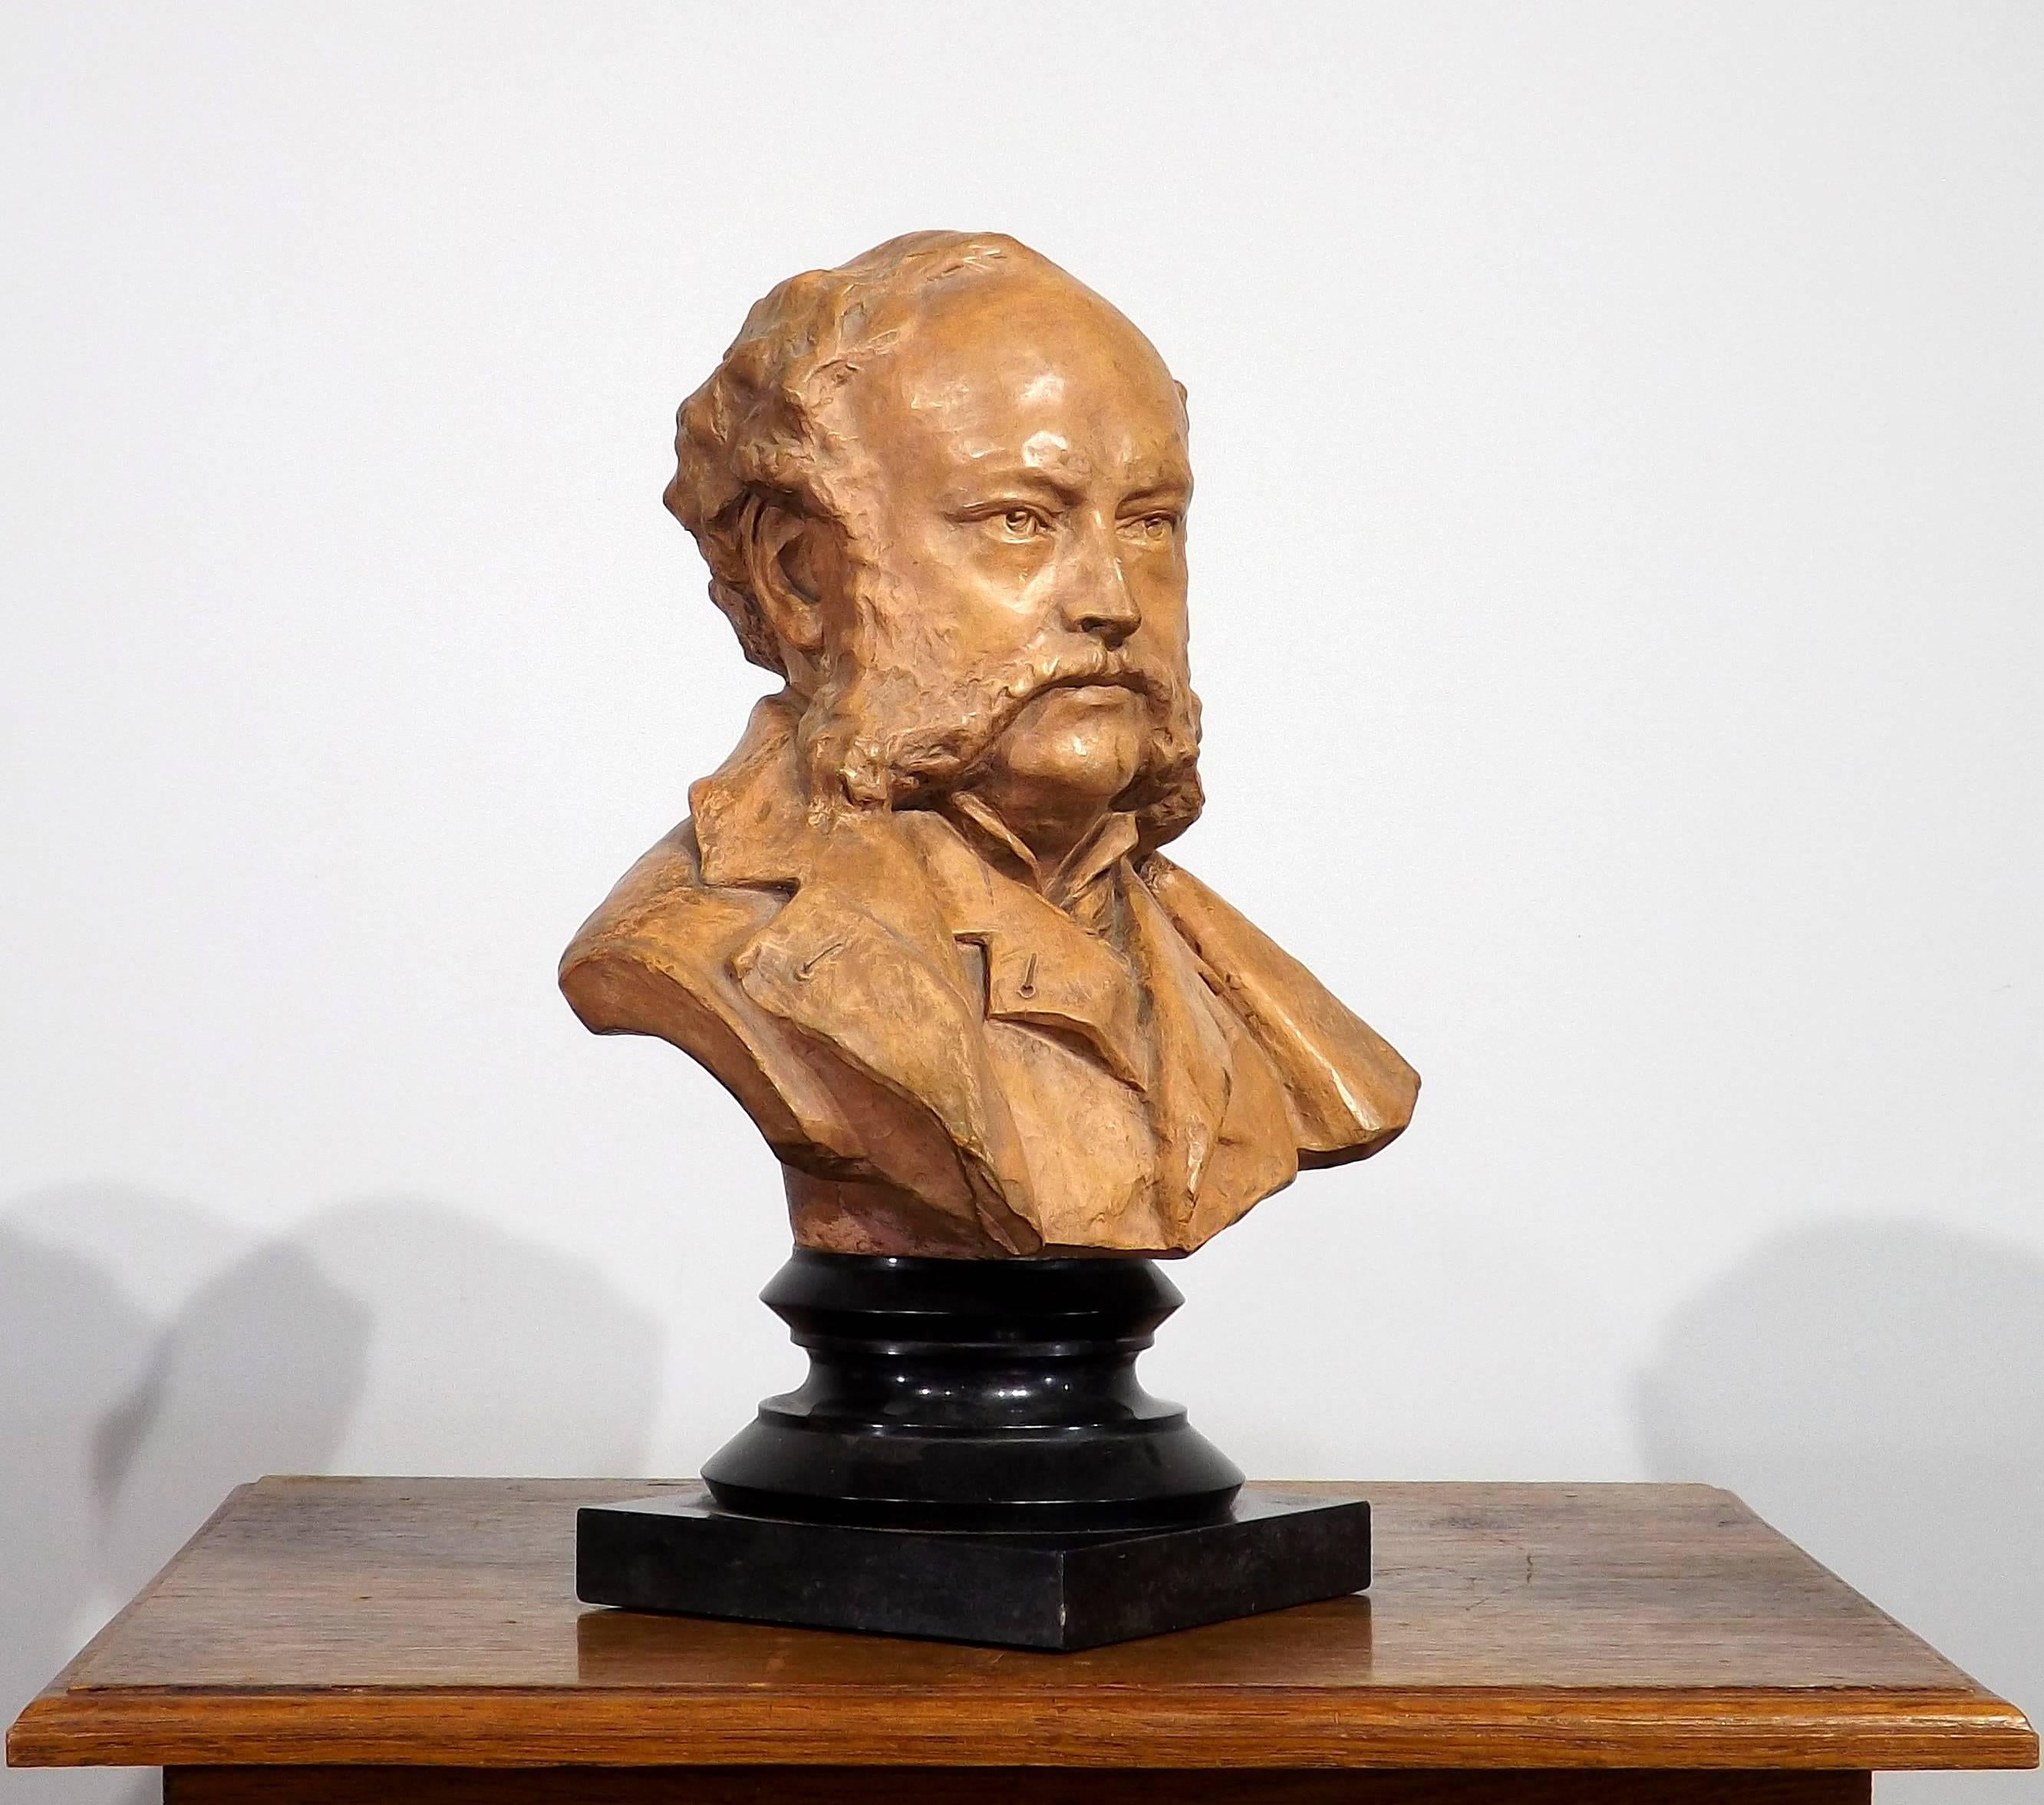 This original sculpture, signed and dated 1880, by renowned American Olin Levi Warner (1844-1896) of stately gentleman rests on a black marble plinth. Warner was known for sculpting many prominent figures, including President Rutherford B. Hayes and